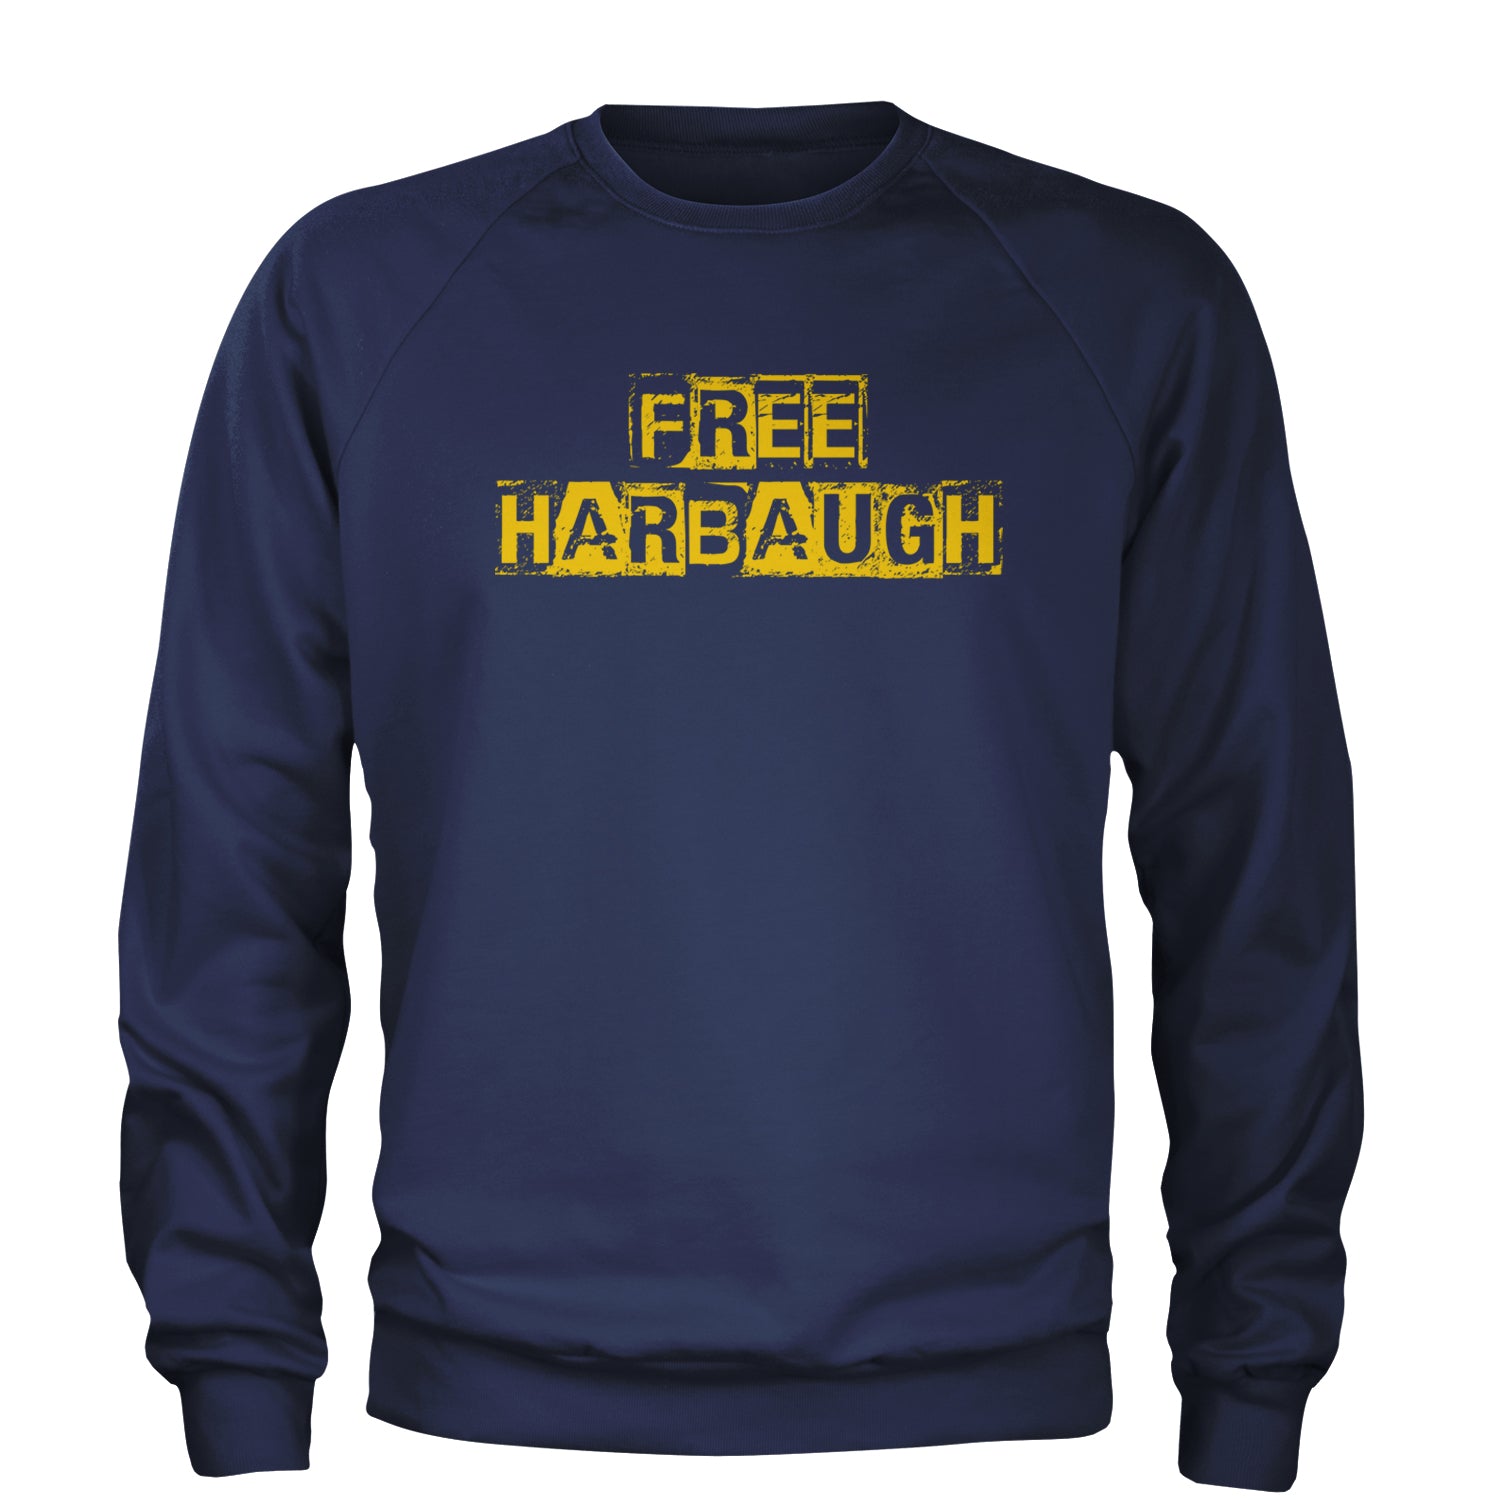 Free Harbaugh Release Our Coach Adult Crewneck Sweatshirt